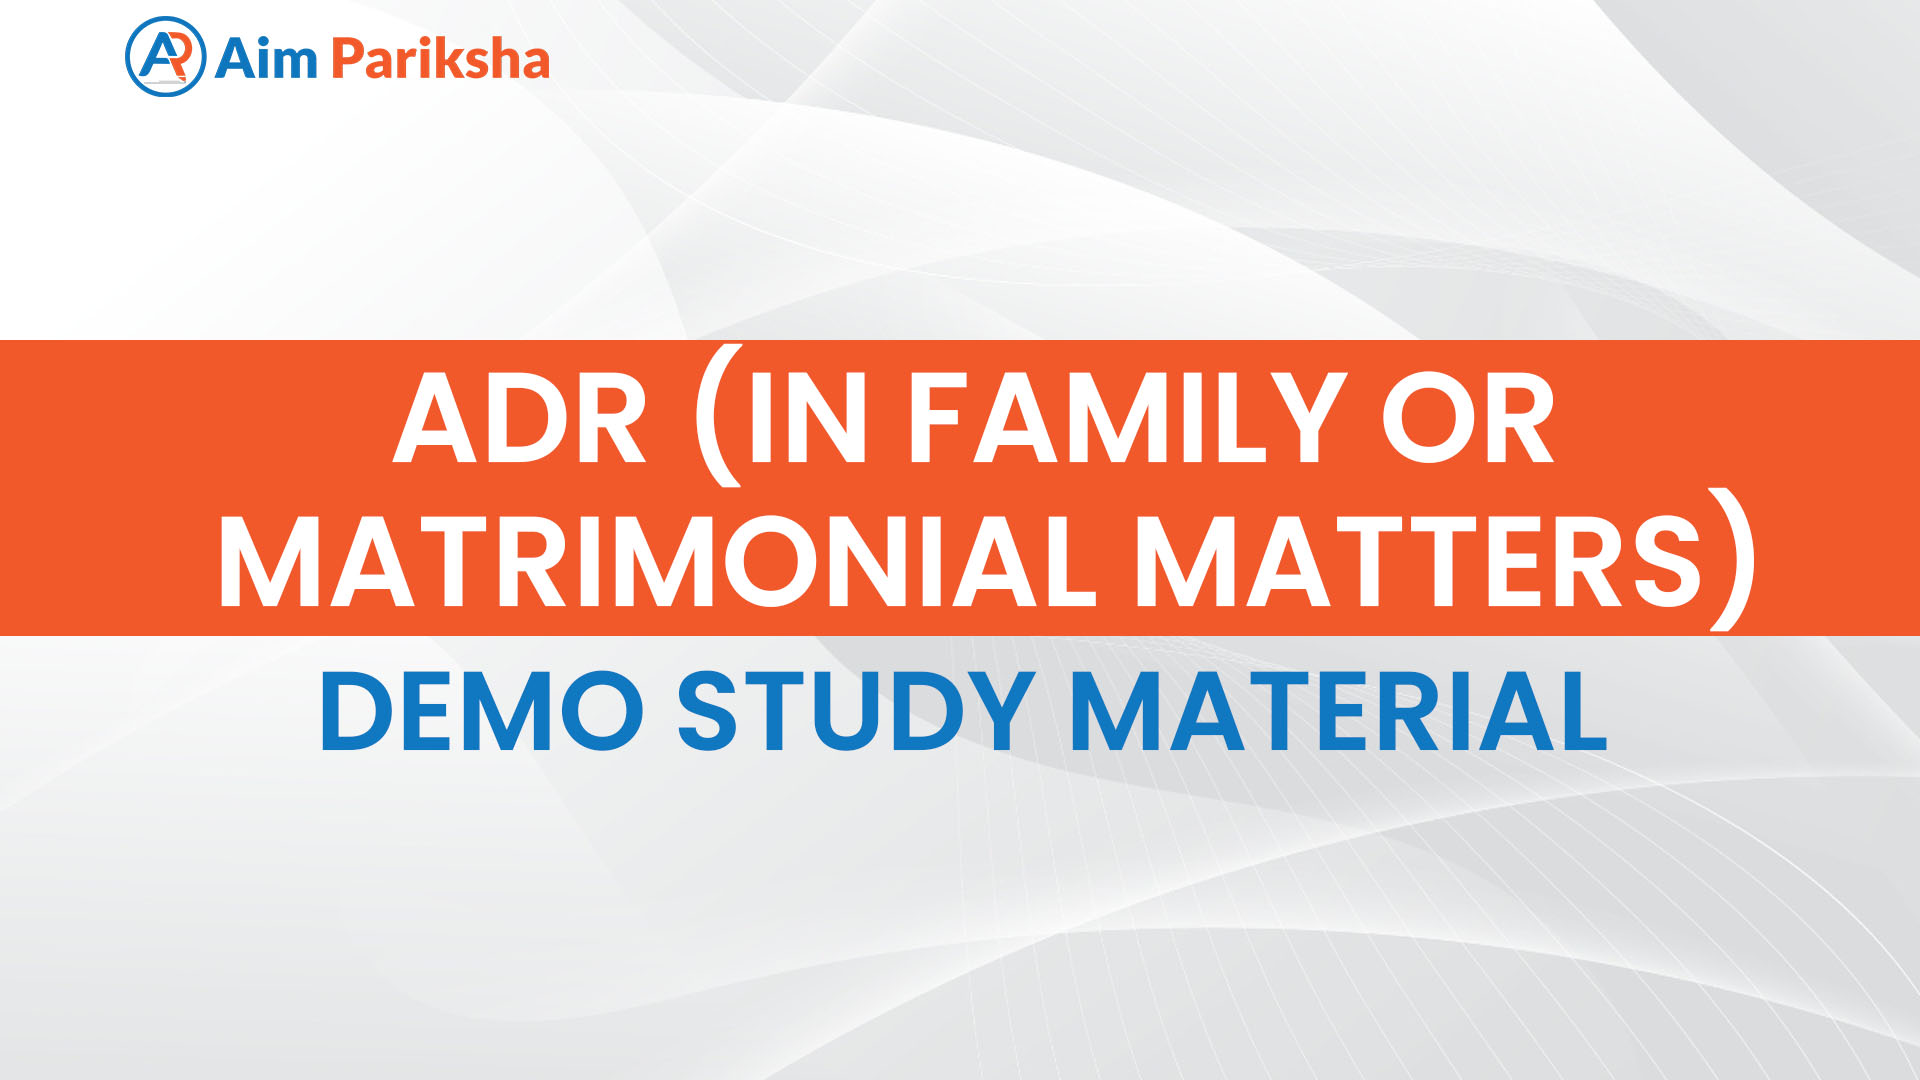 ADR (In family or matrimonial matters)